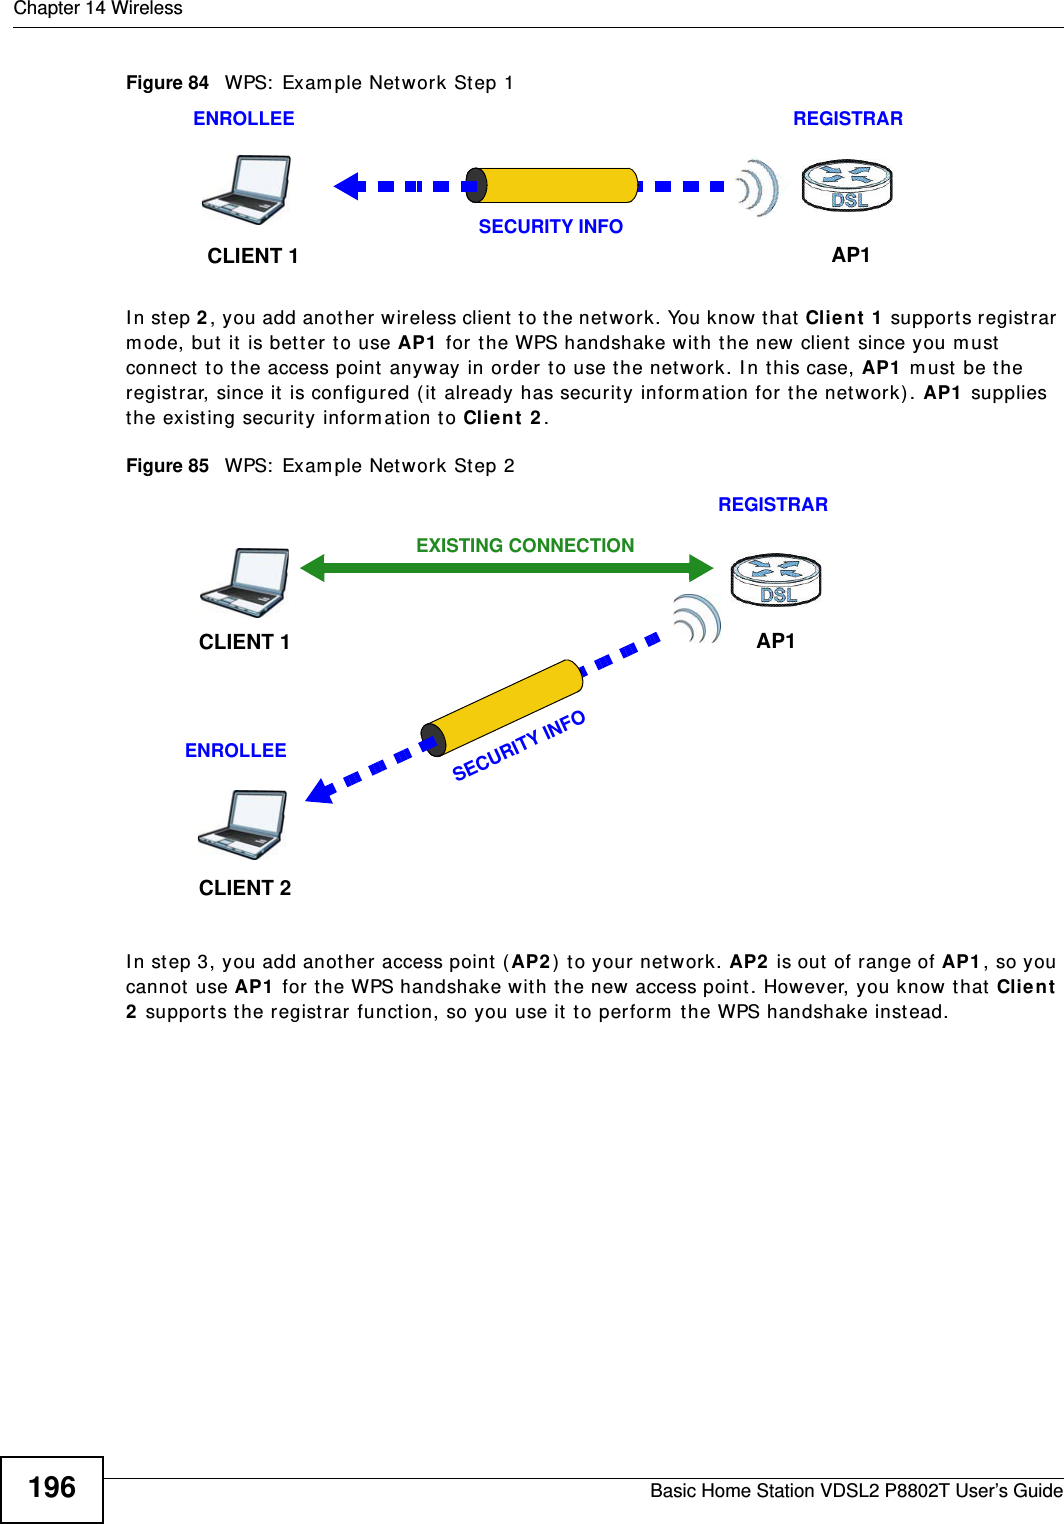 Chapter 14 WirelessBasic Home Station VDSL2 P8802T User’s Guide196Figure 84   WPS:  Exam ple Net work St ep 1I n step 2 , you add another wireless client  t o t he net work. You know that  Client 1  support s regist rar m ode, but  it is bet t er to use AP1  for the WPS handshake wit h the new  client  since you m ust  connect  to t he access point  anyway in order to use the network. I n t his case, AP1  m ust  be t he regist rar, since it is configured (it  already has security inform at ion for the network). AP1  supplies the exist ing security infor m ation to Clie nt 2 .Figure 85   WPS:  Exam ple Net work St ep 2I n step 3, you add another access point (AP2 ) to your network. AP2  is out of range of AP1 , so you cannot  use AP1  for t he WPS handshake wit h t he new access point. However, you know that Client  2 support s the regist rar funct ion, so you use it t o perform  t he WPS handshake inst ead.REGISTRARENROLLEESECURITY INFOCLIENT 1 AP1REGISTRARCLIENT 1 AP1ENROLLEECLIENT 2EXISTING CONNECTIONSECURITY INFO